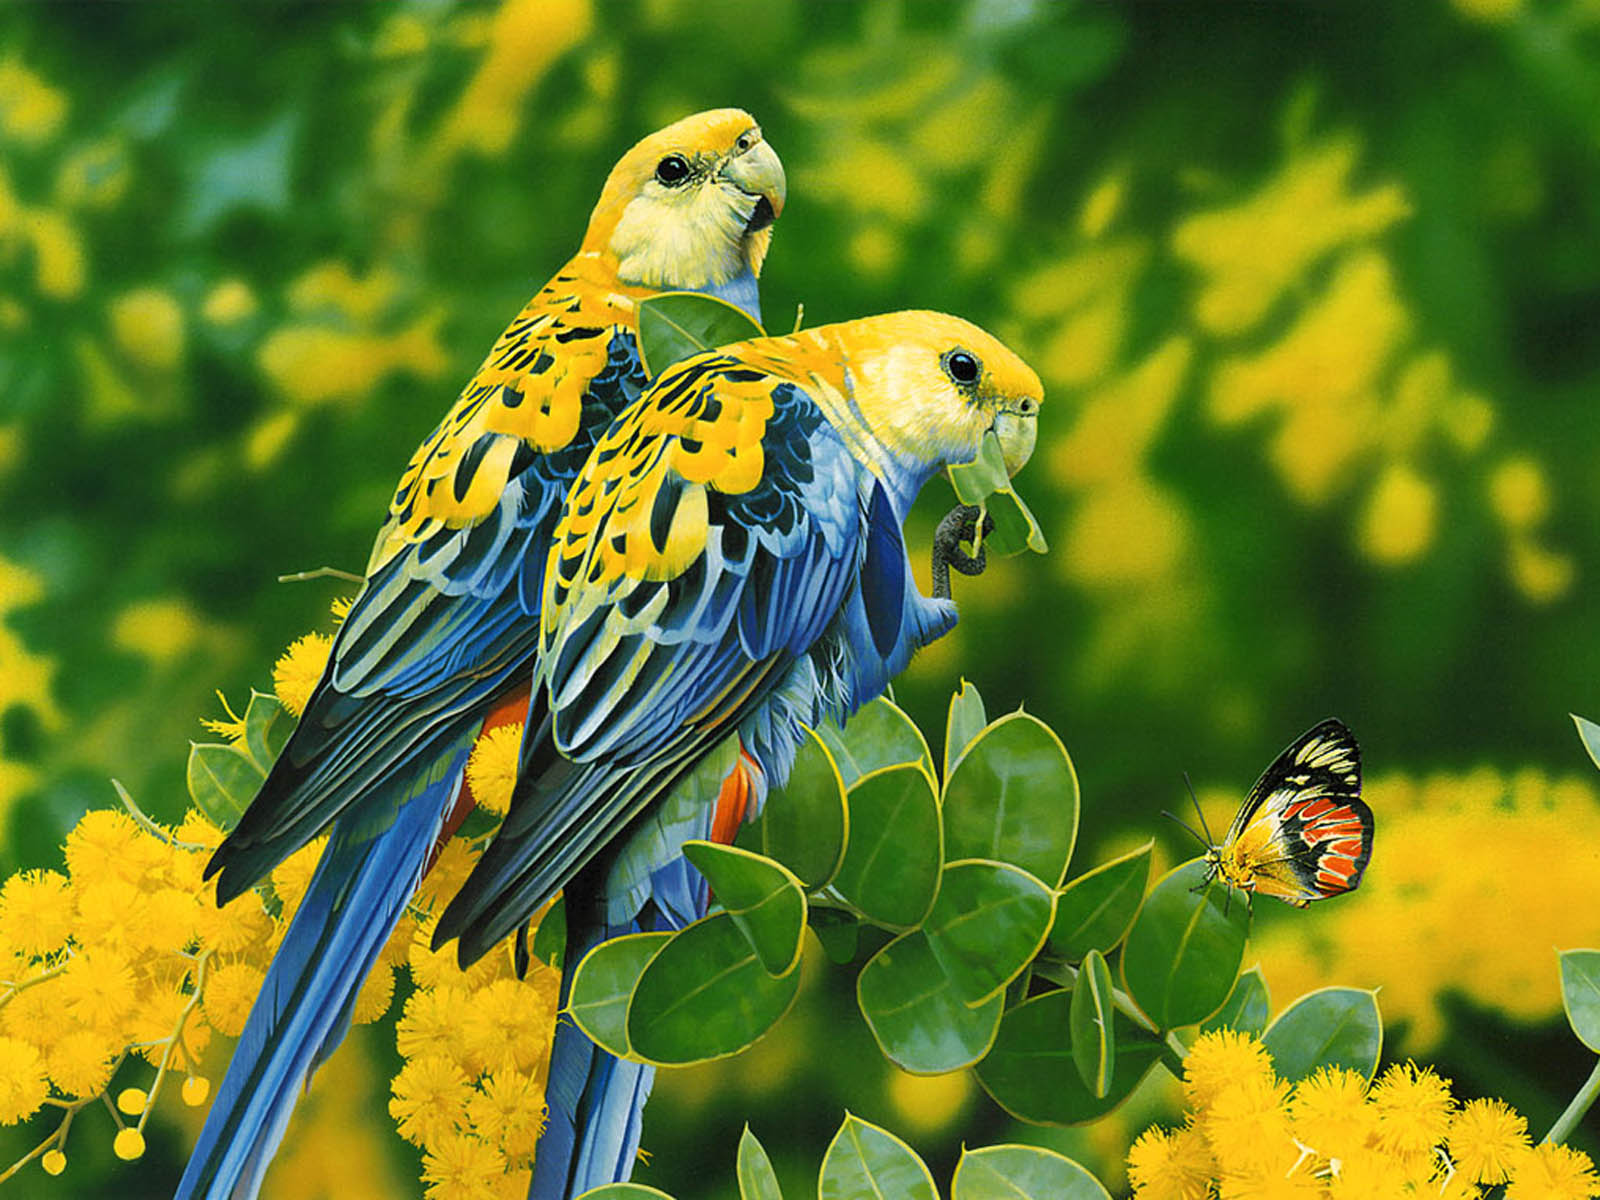  Birds Desktop Wallpapers Backgrounds PhotosImages and Pictures for